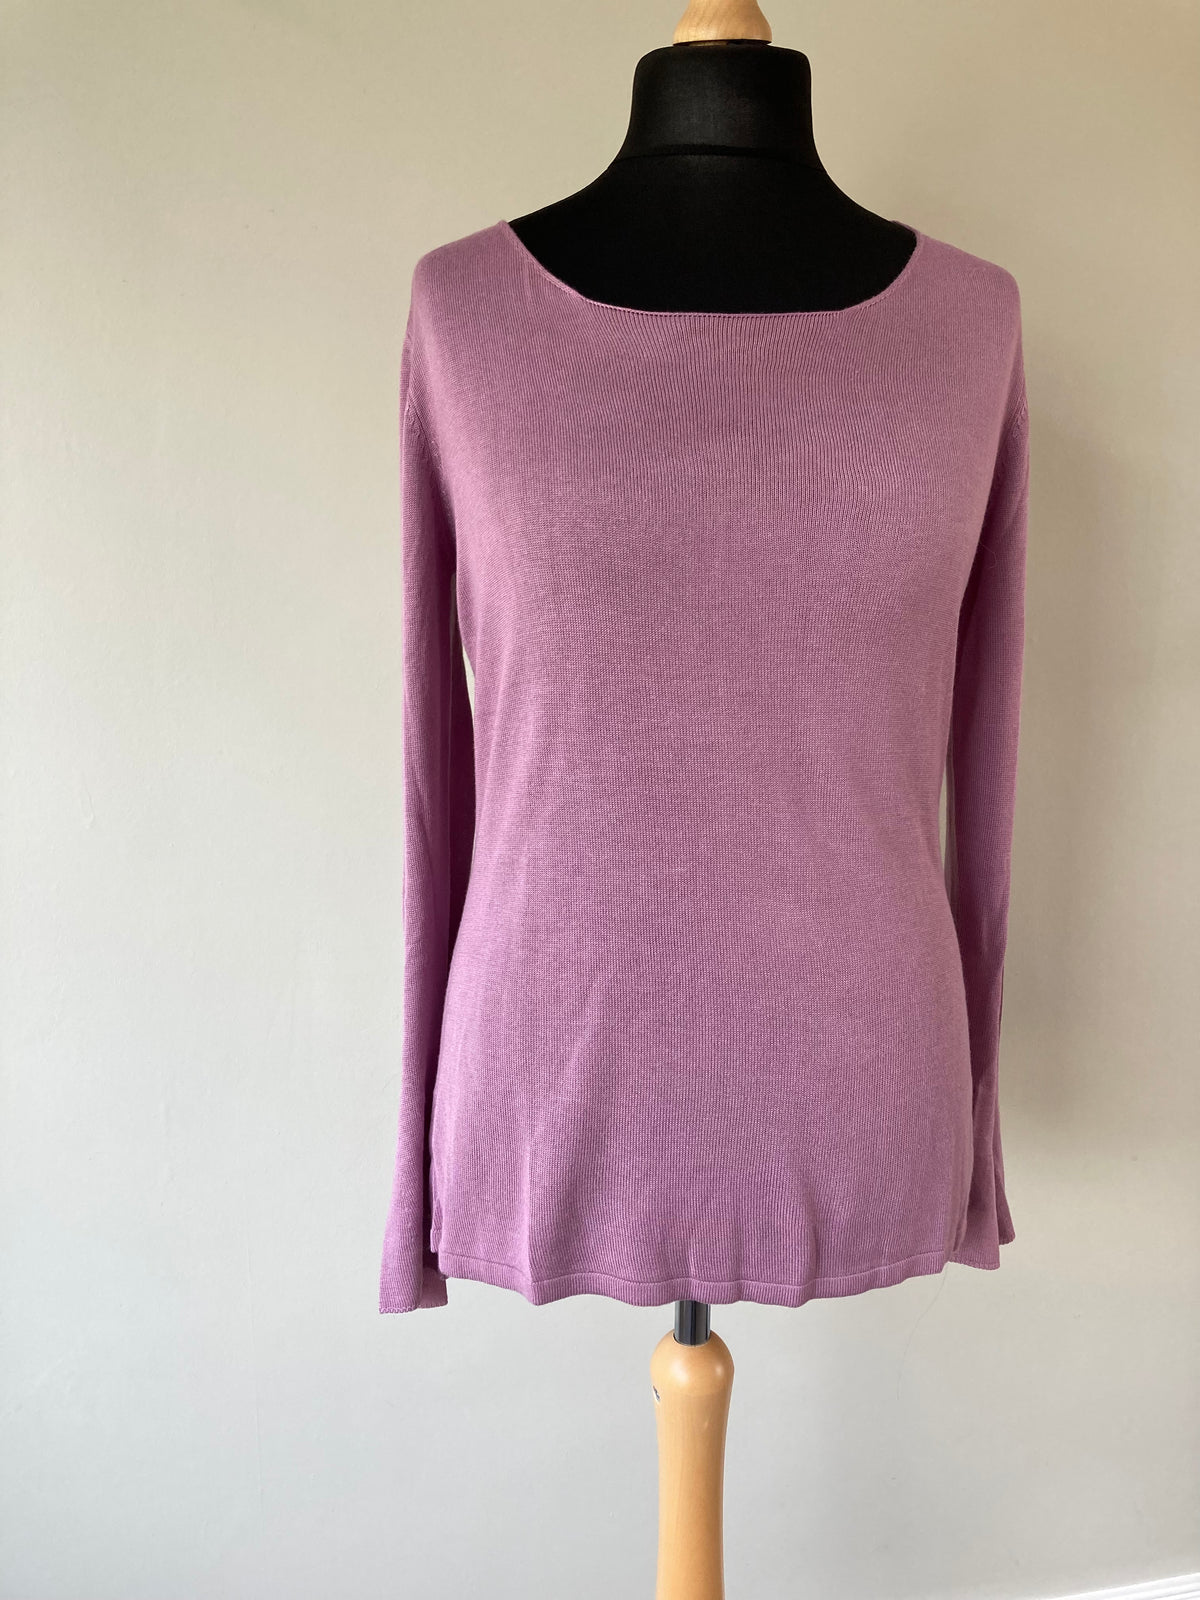 Lilac long sleeve top by LASCANA size 14/16